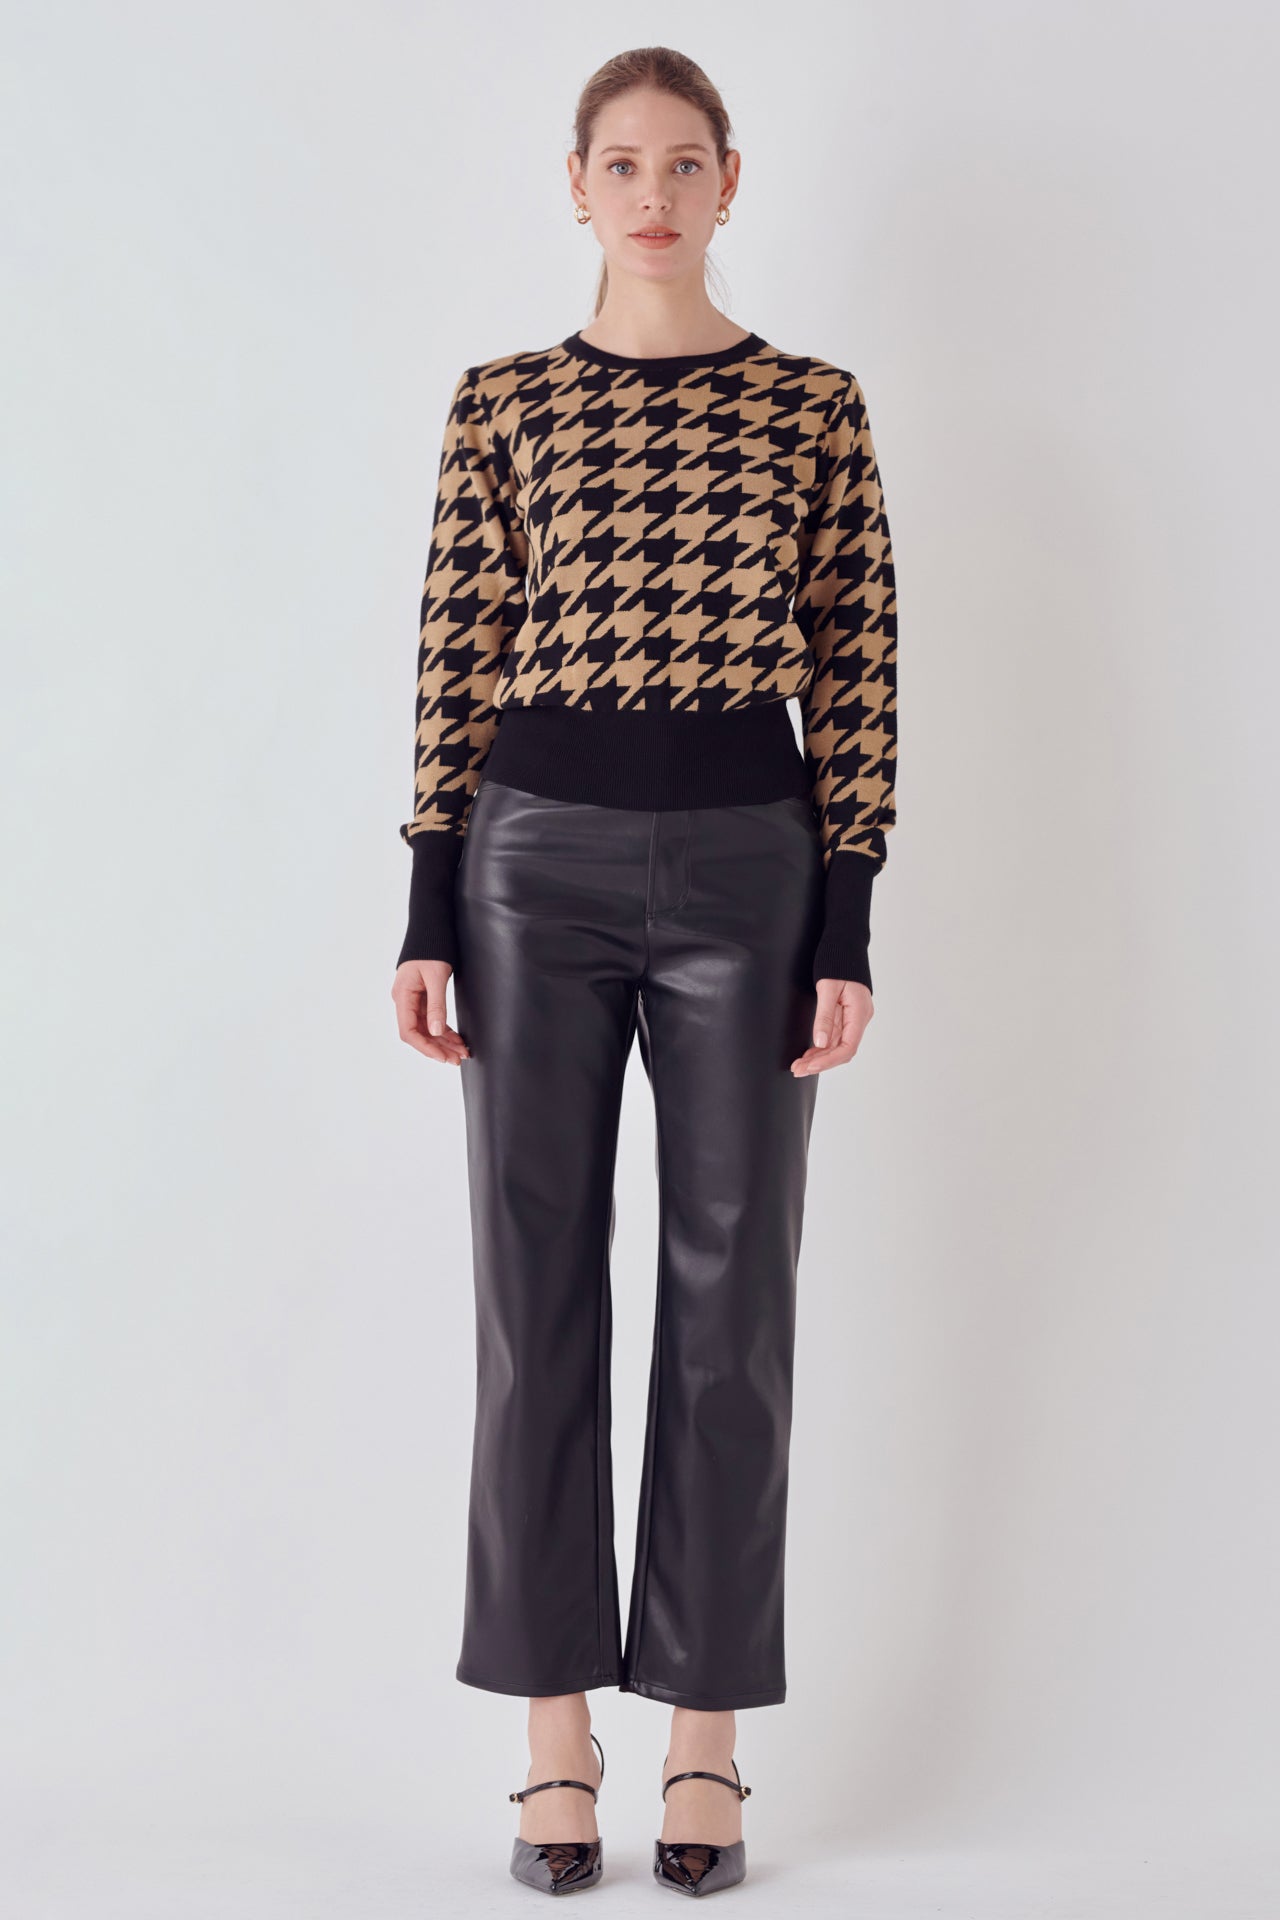 Knit Houndstooth Sweater